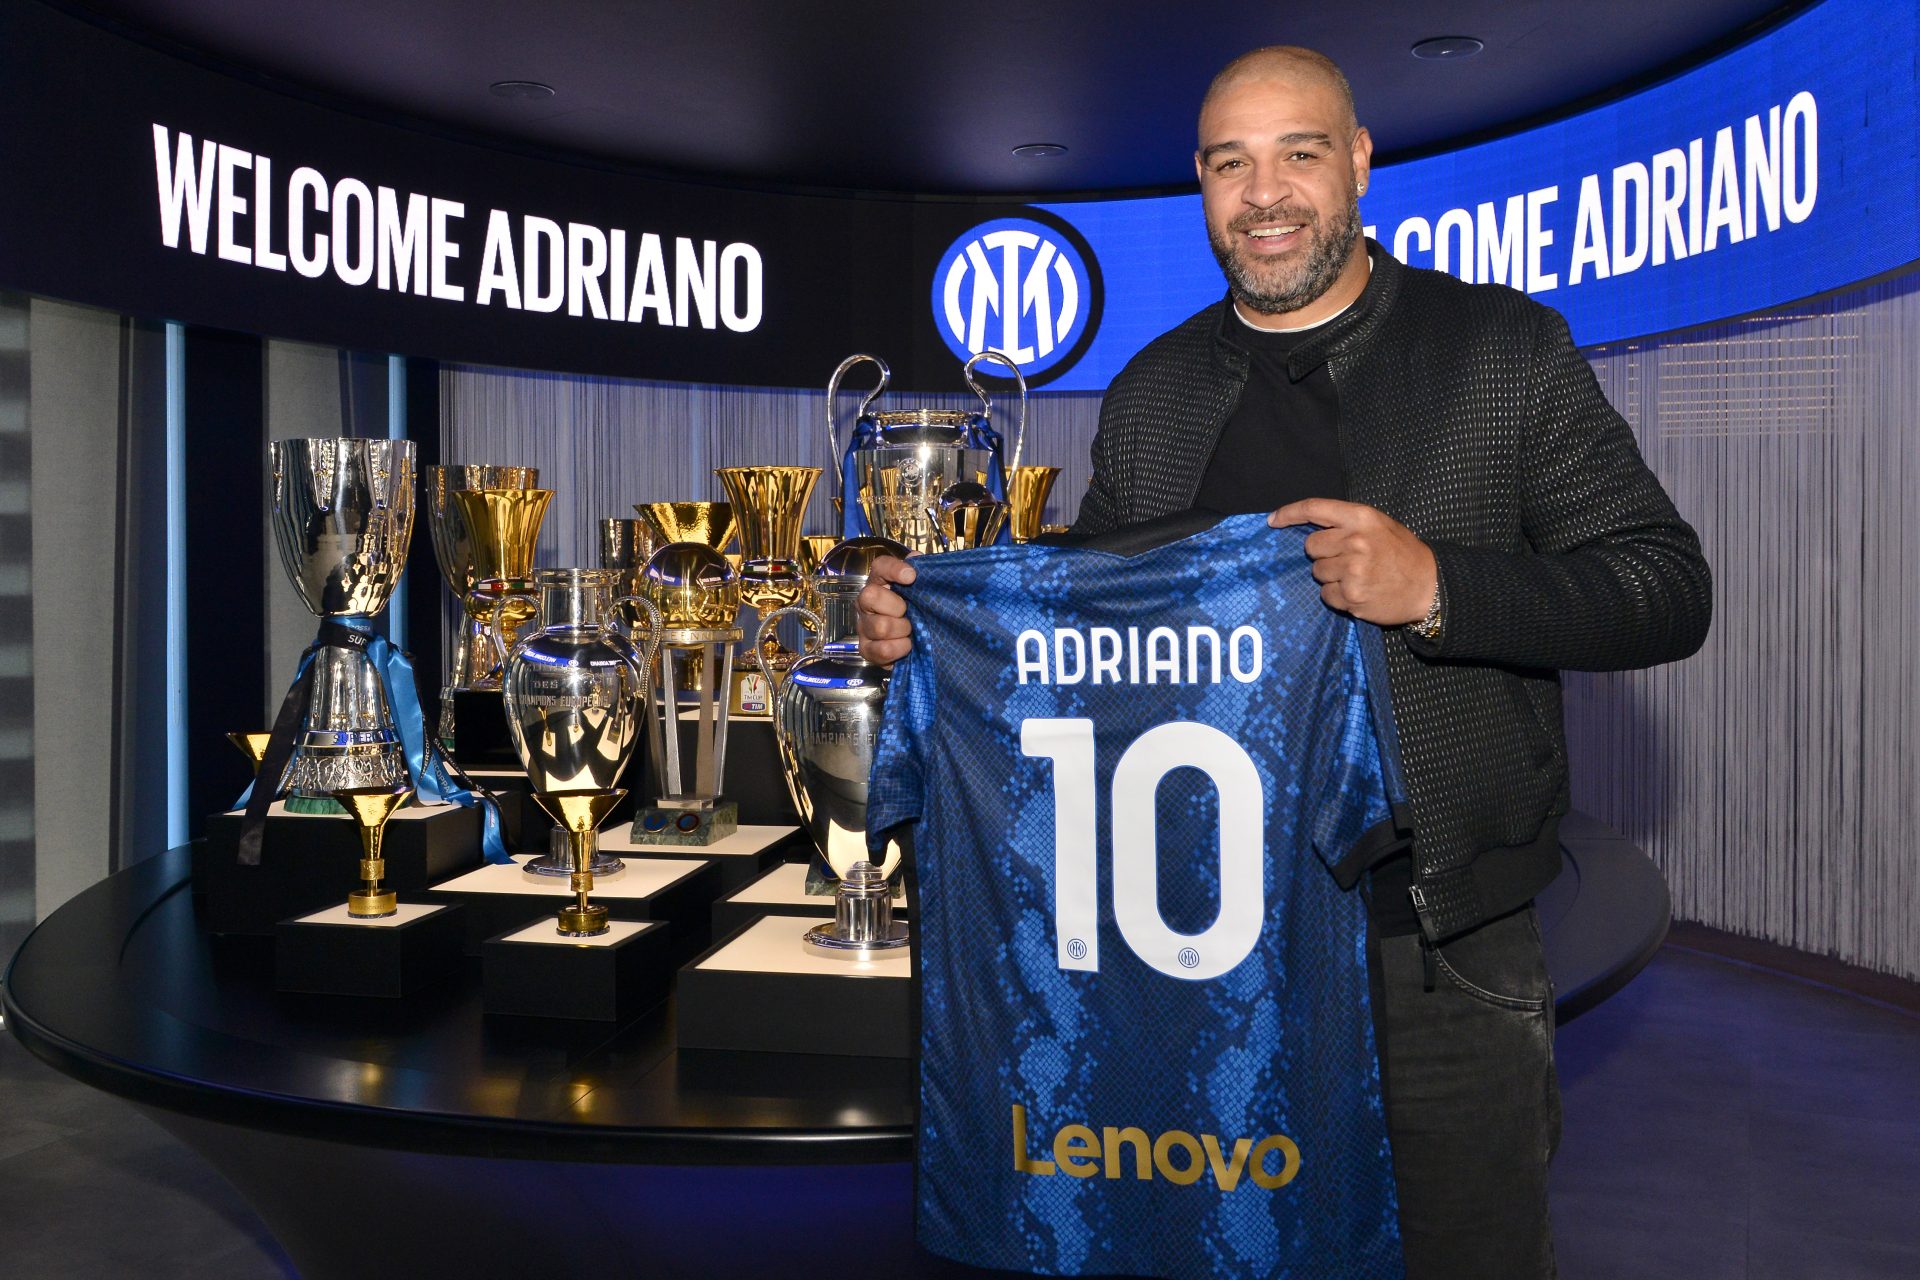 <p><span>After the Calciopoli scandal, Inter was crowned Italian champions in 2006. This title was Adriano's first championship and the start of a long series of five consecutive victories, from 2006 to 2010.</span></p>